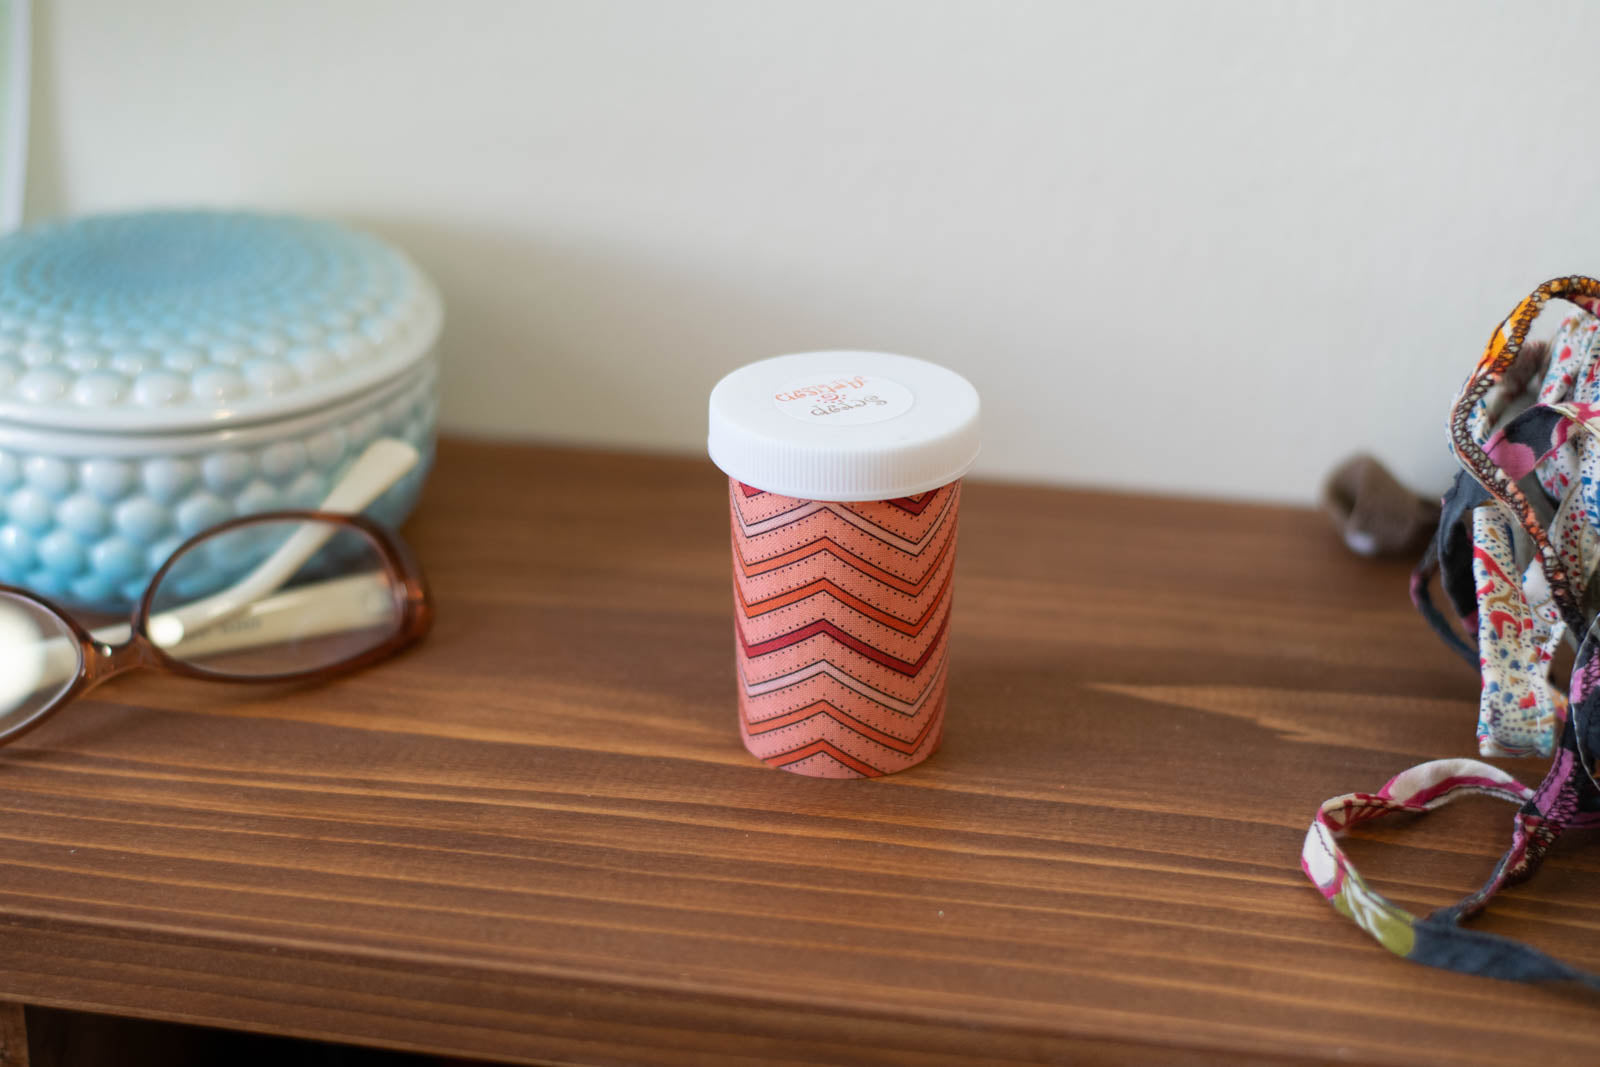 Upcycled Prescription Bottle Sewing Kit — Red and Orange Chevron with Dots on Pink, 2.75" high, closed